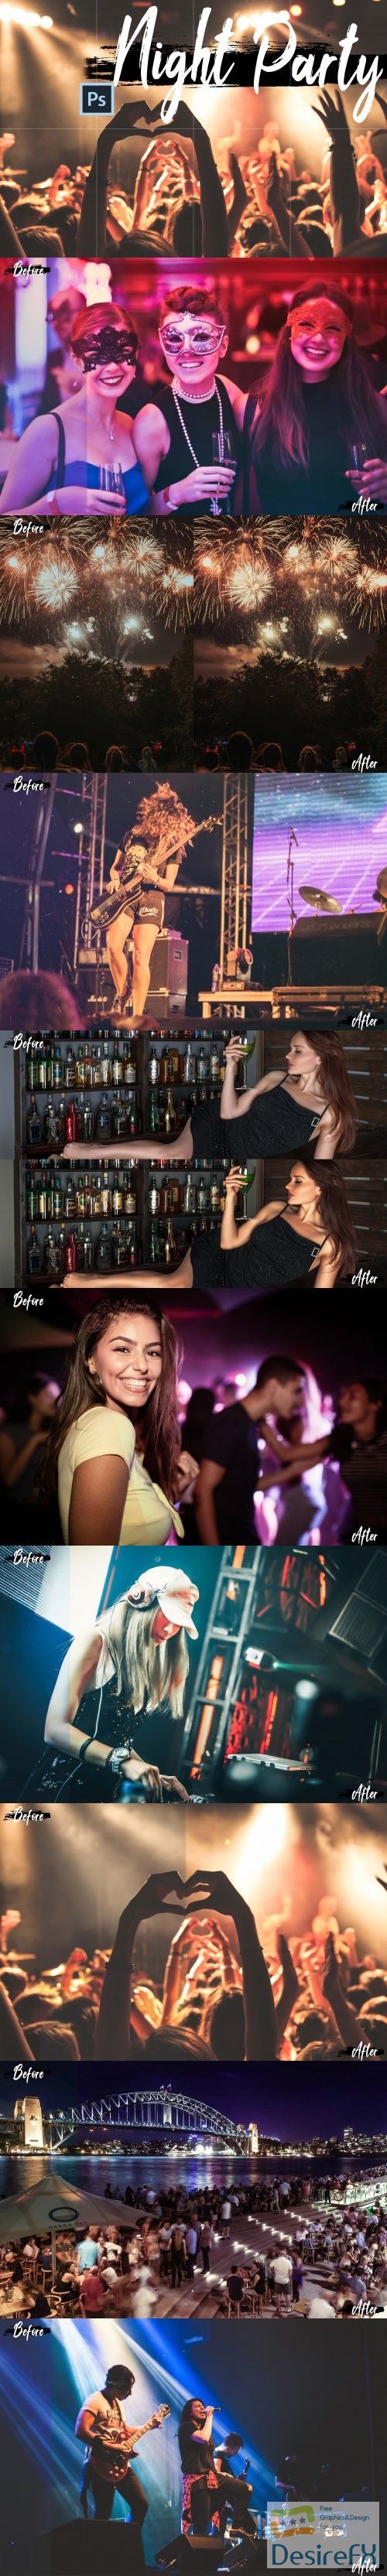 Neo Night Party Color Grading photoshop actions, ACR LUT  - 266567